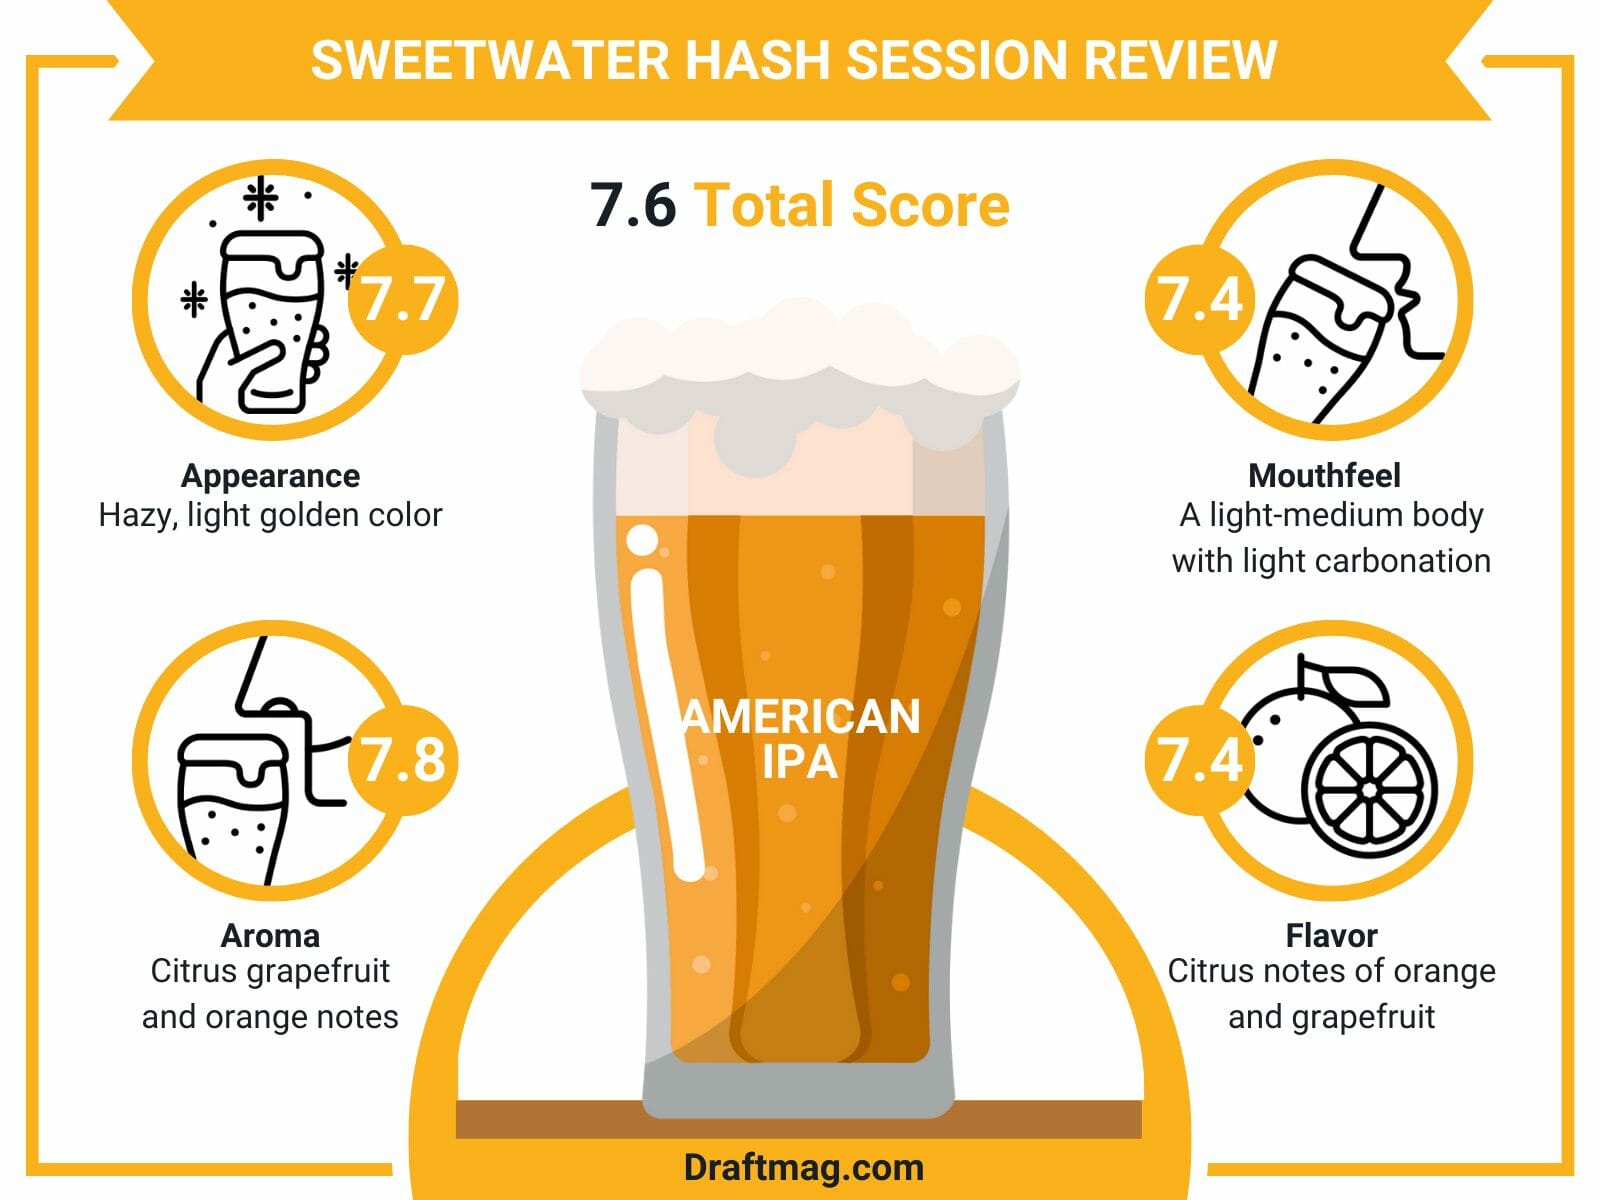 Sweetwater hash session review infographic